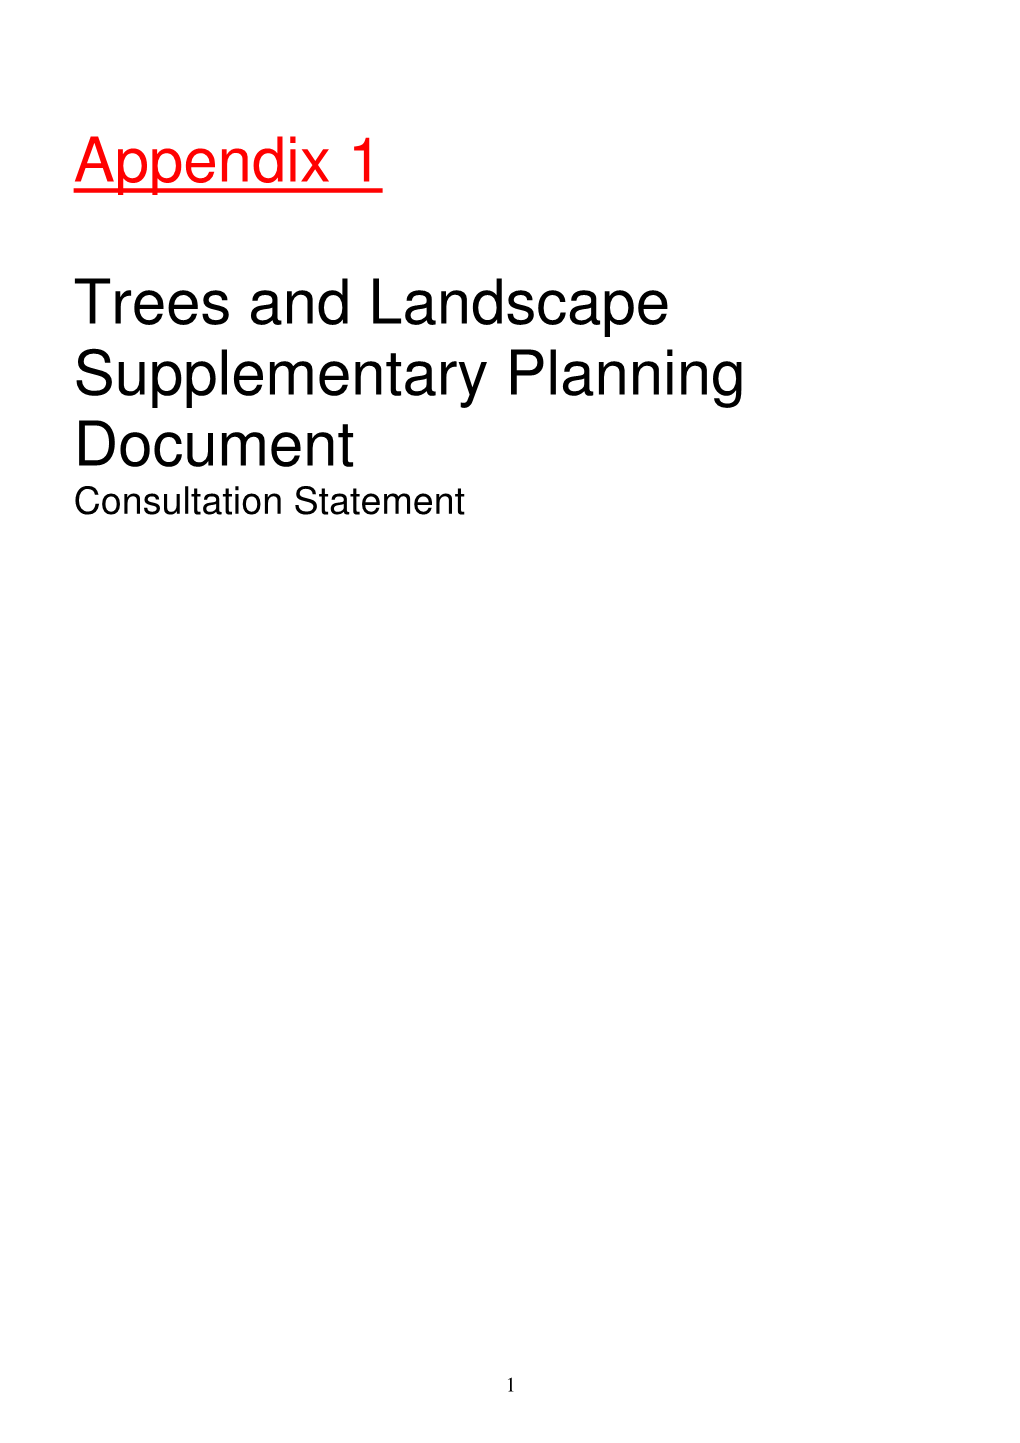 Appendix 1 Trees and Landscape Supplementary Planning Document